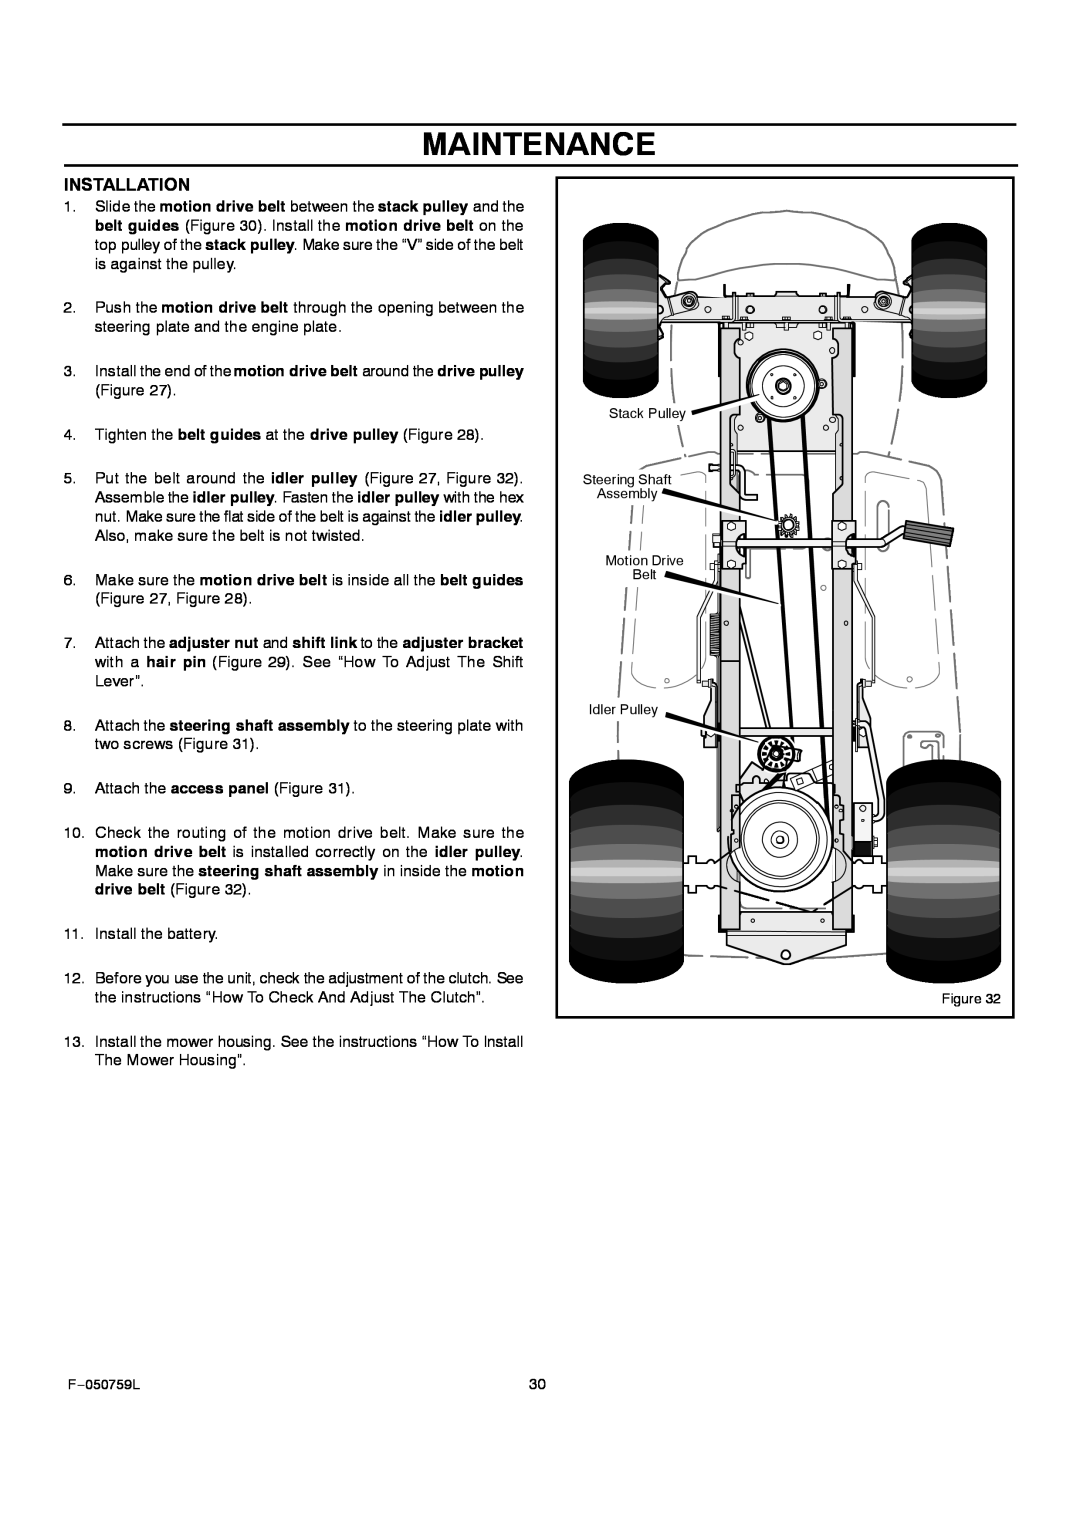 Rover 405012x108A owner manual Maintenance, Installation 